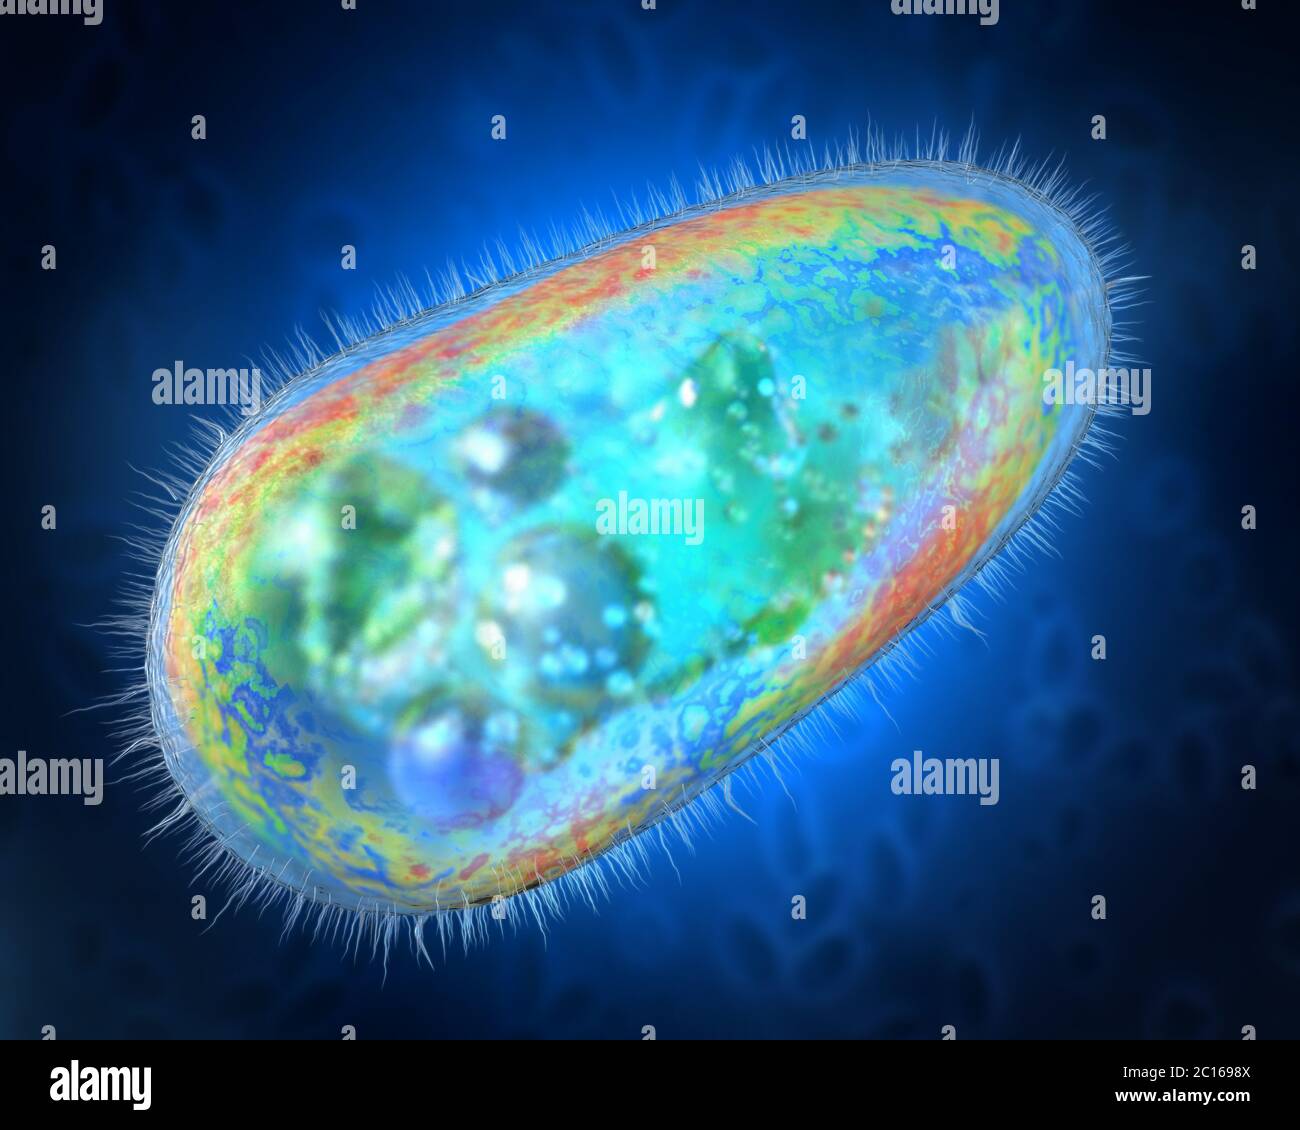 3D illustration of transparent and colorful protozoa or unicellular organism Stock Photo